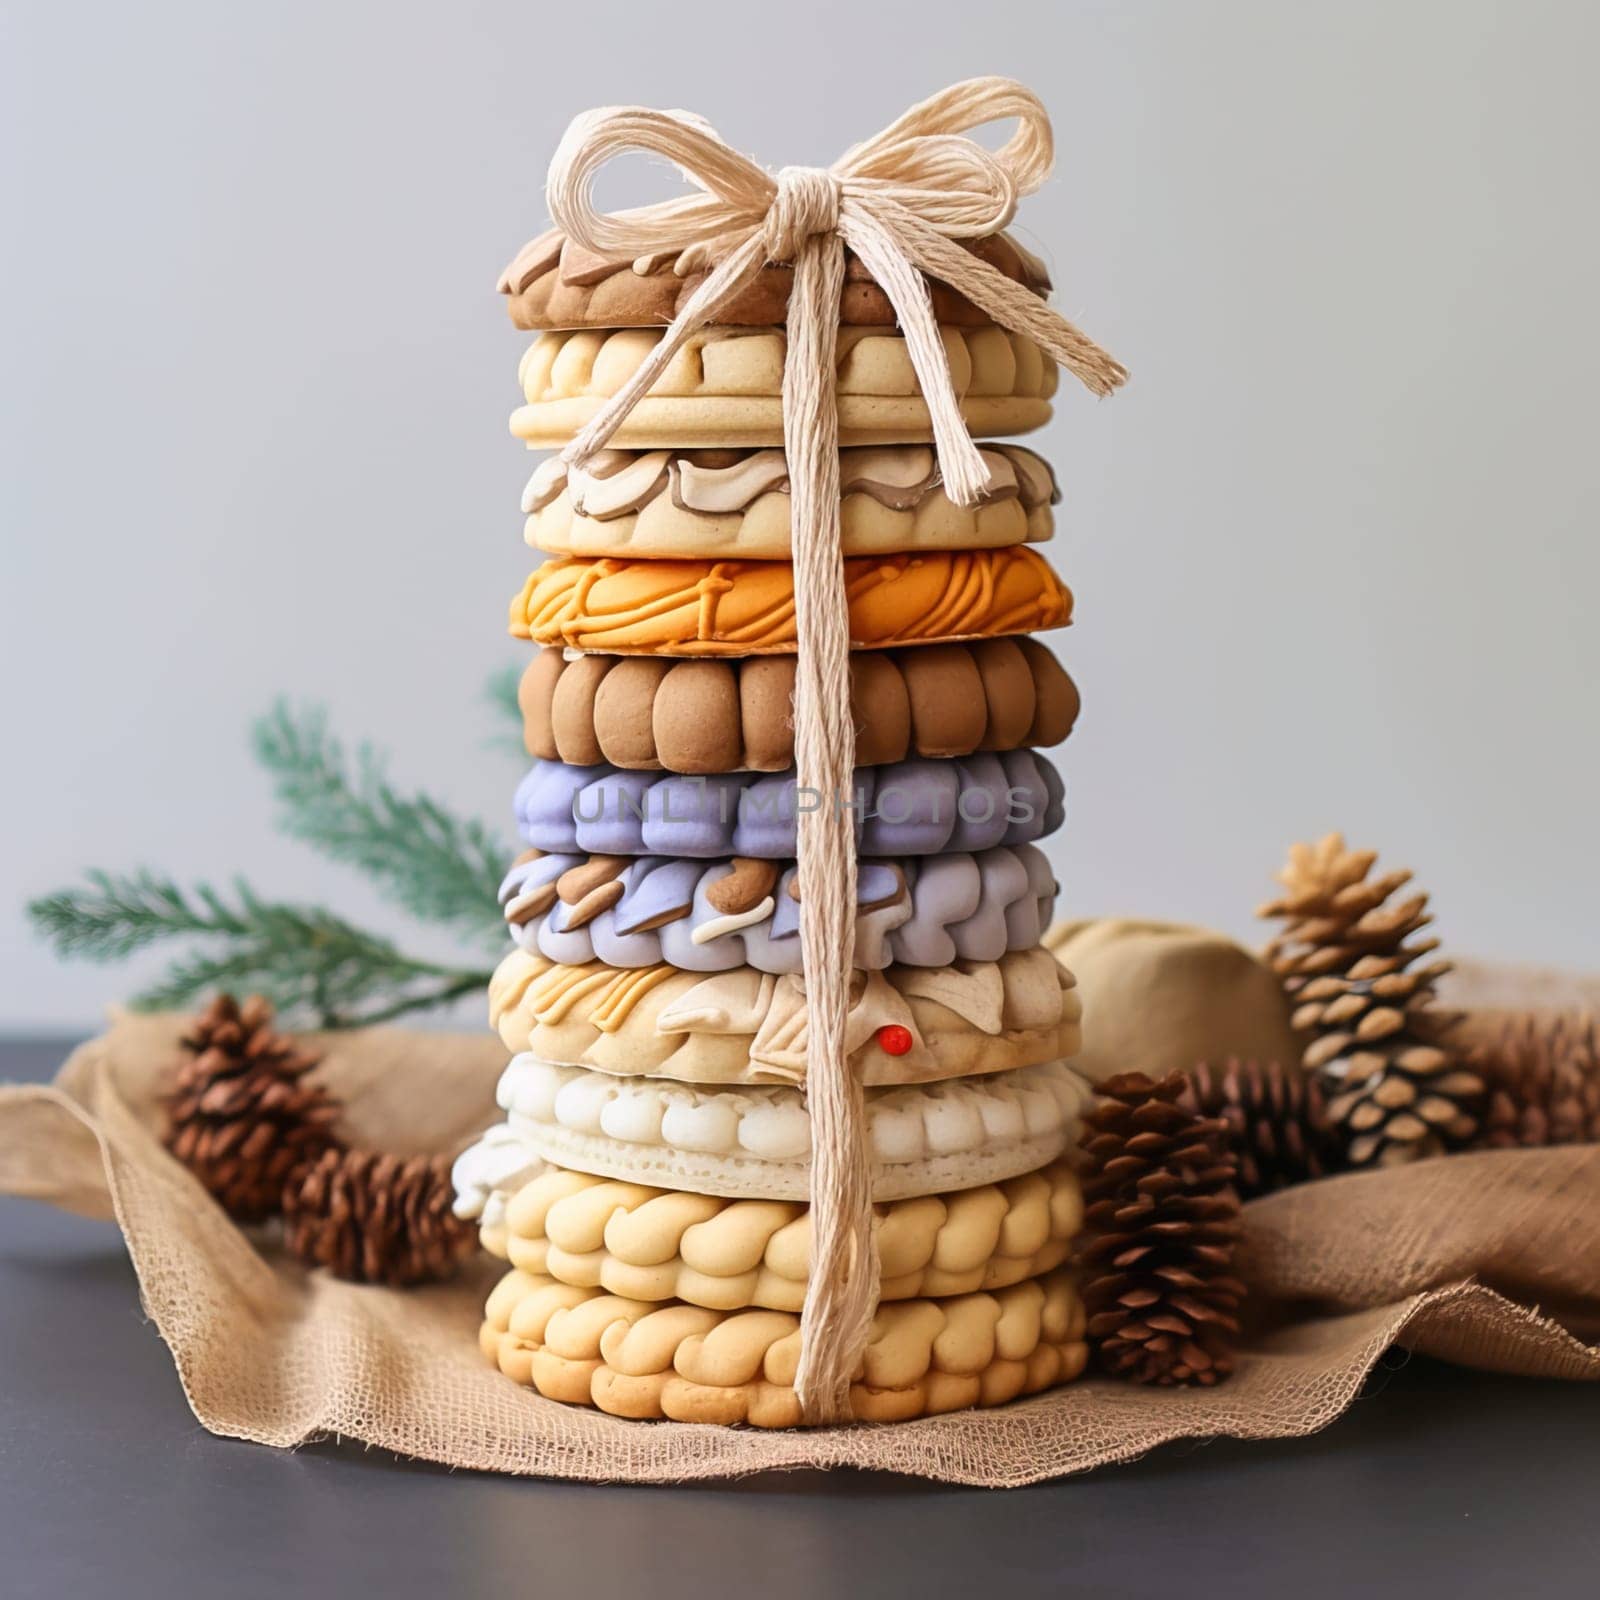 New Year's cookies in a stack tied with braid. by Yurich32